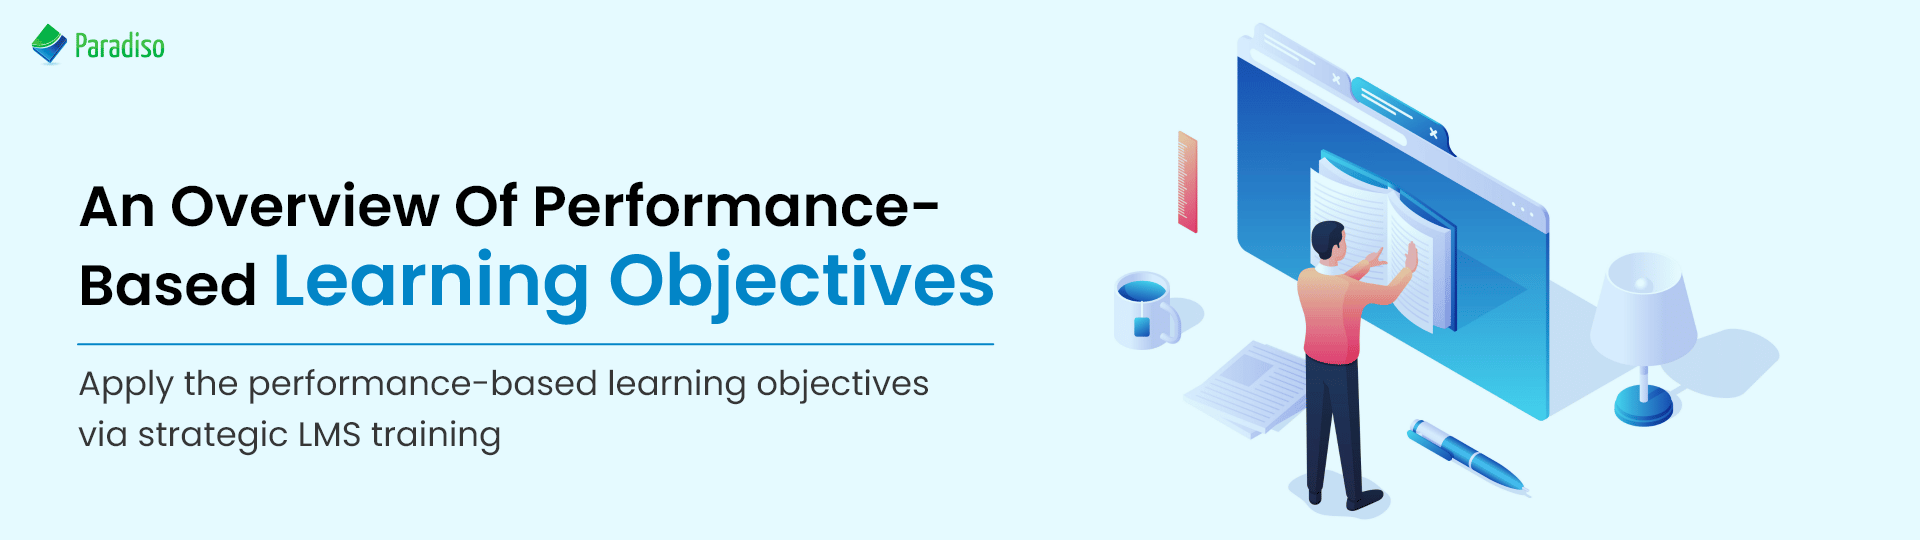 An Overview Of Performance-Based Learning Objectives